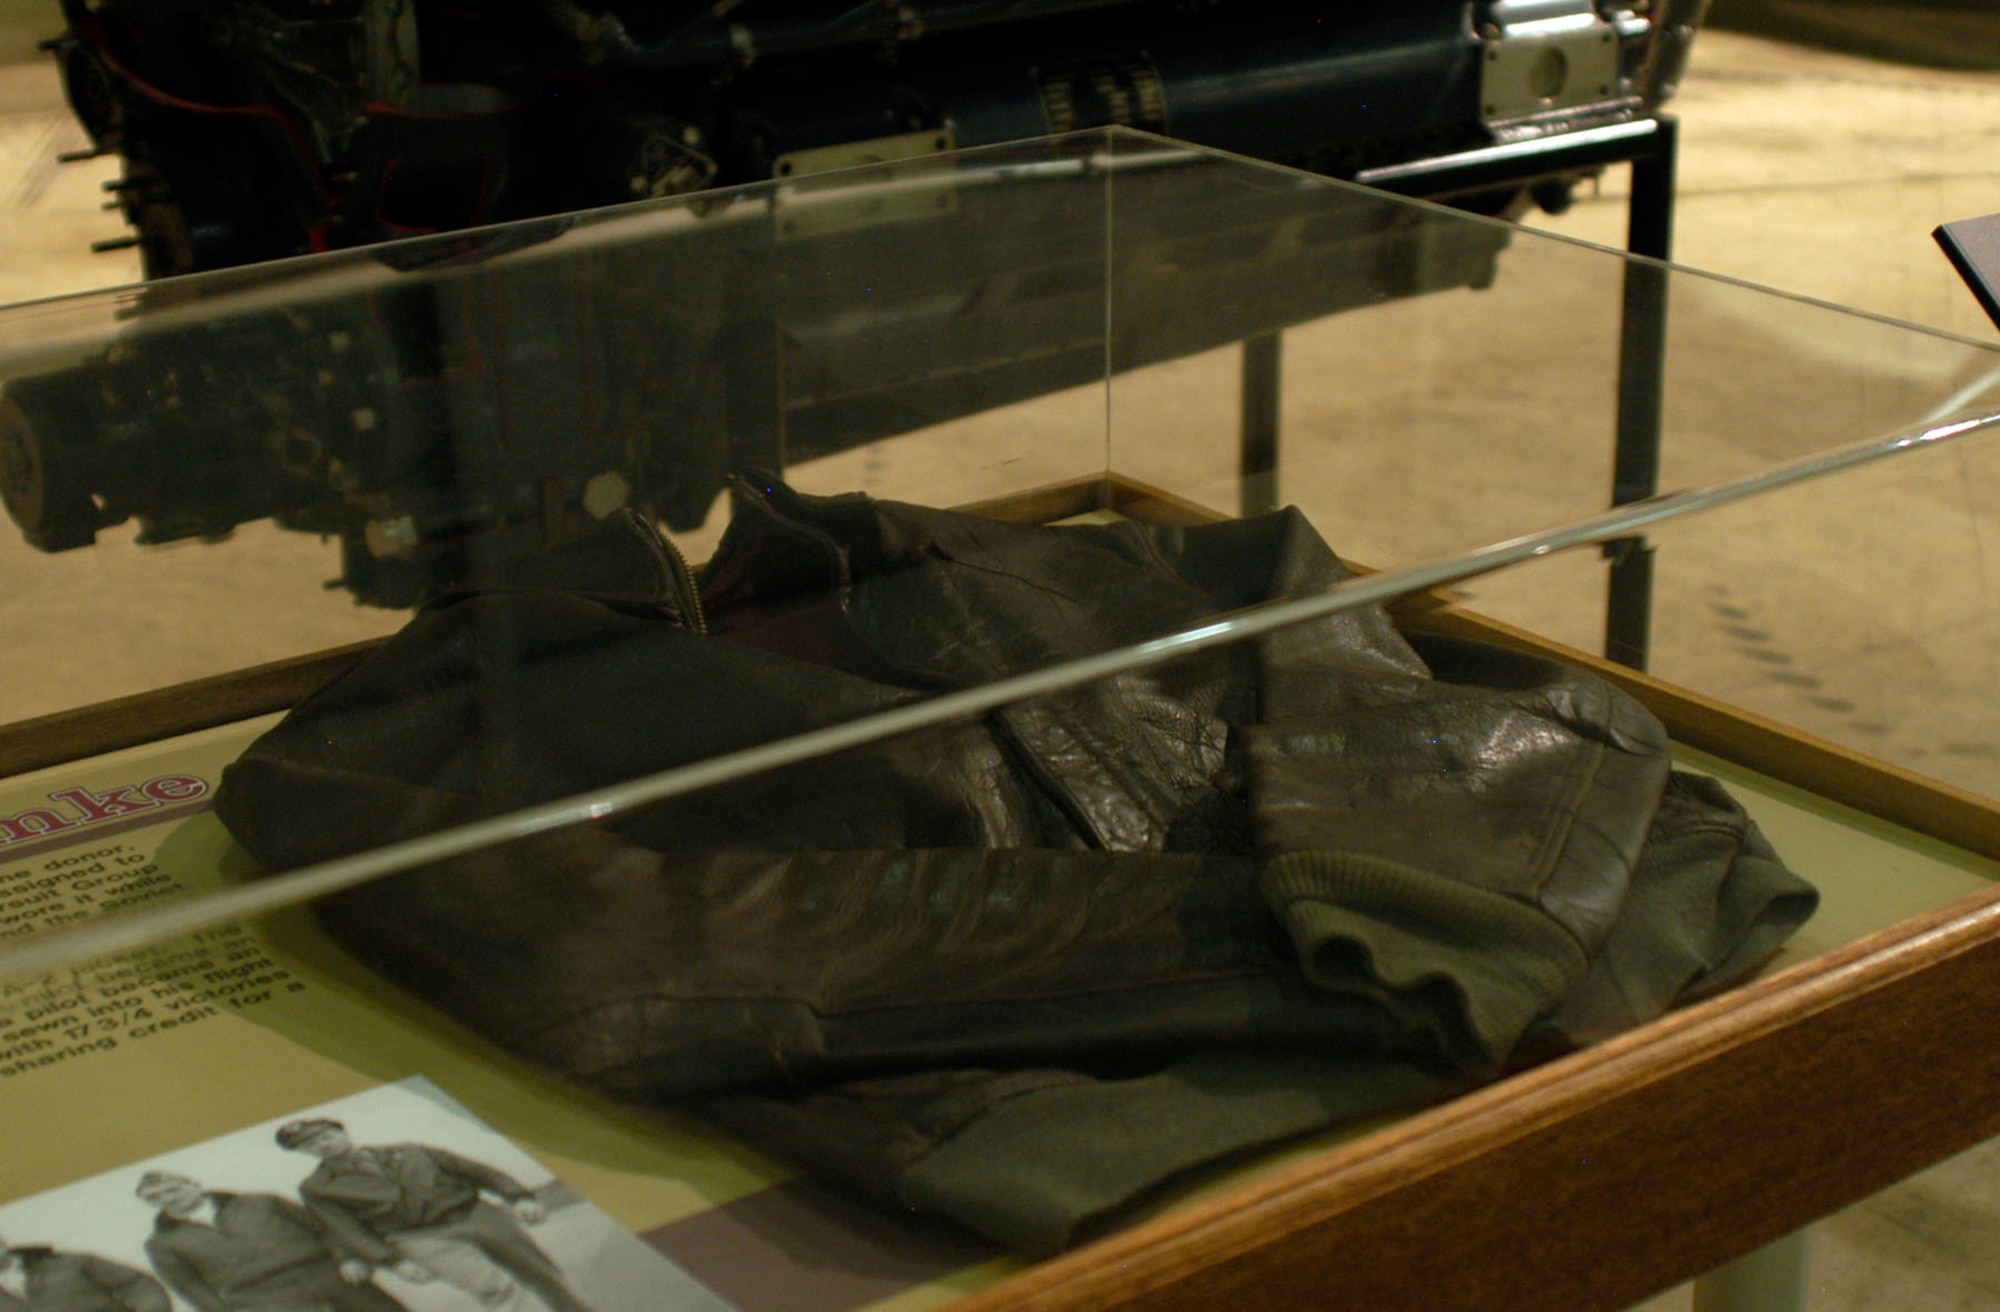 DAYTON, Ohio - Col. Hubert "Hub" Zemke A-2 flight jacket on display in the World War II Gallery at the National Miuseum of the U.S. Air Force. (U.S. Air Force photo) 